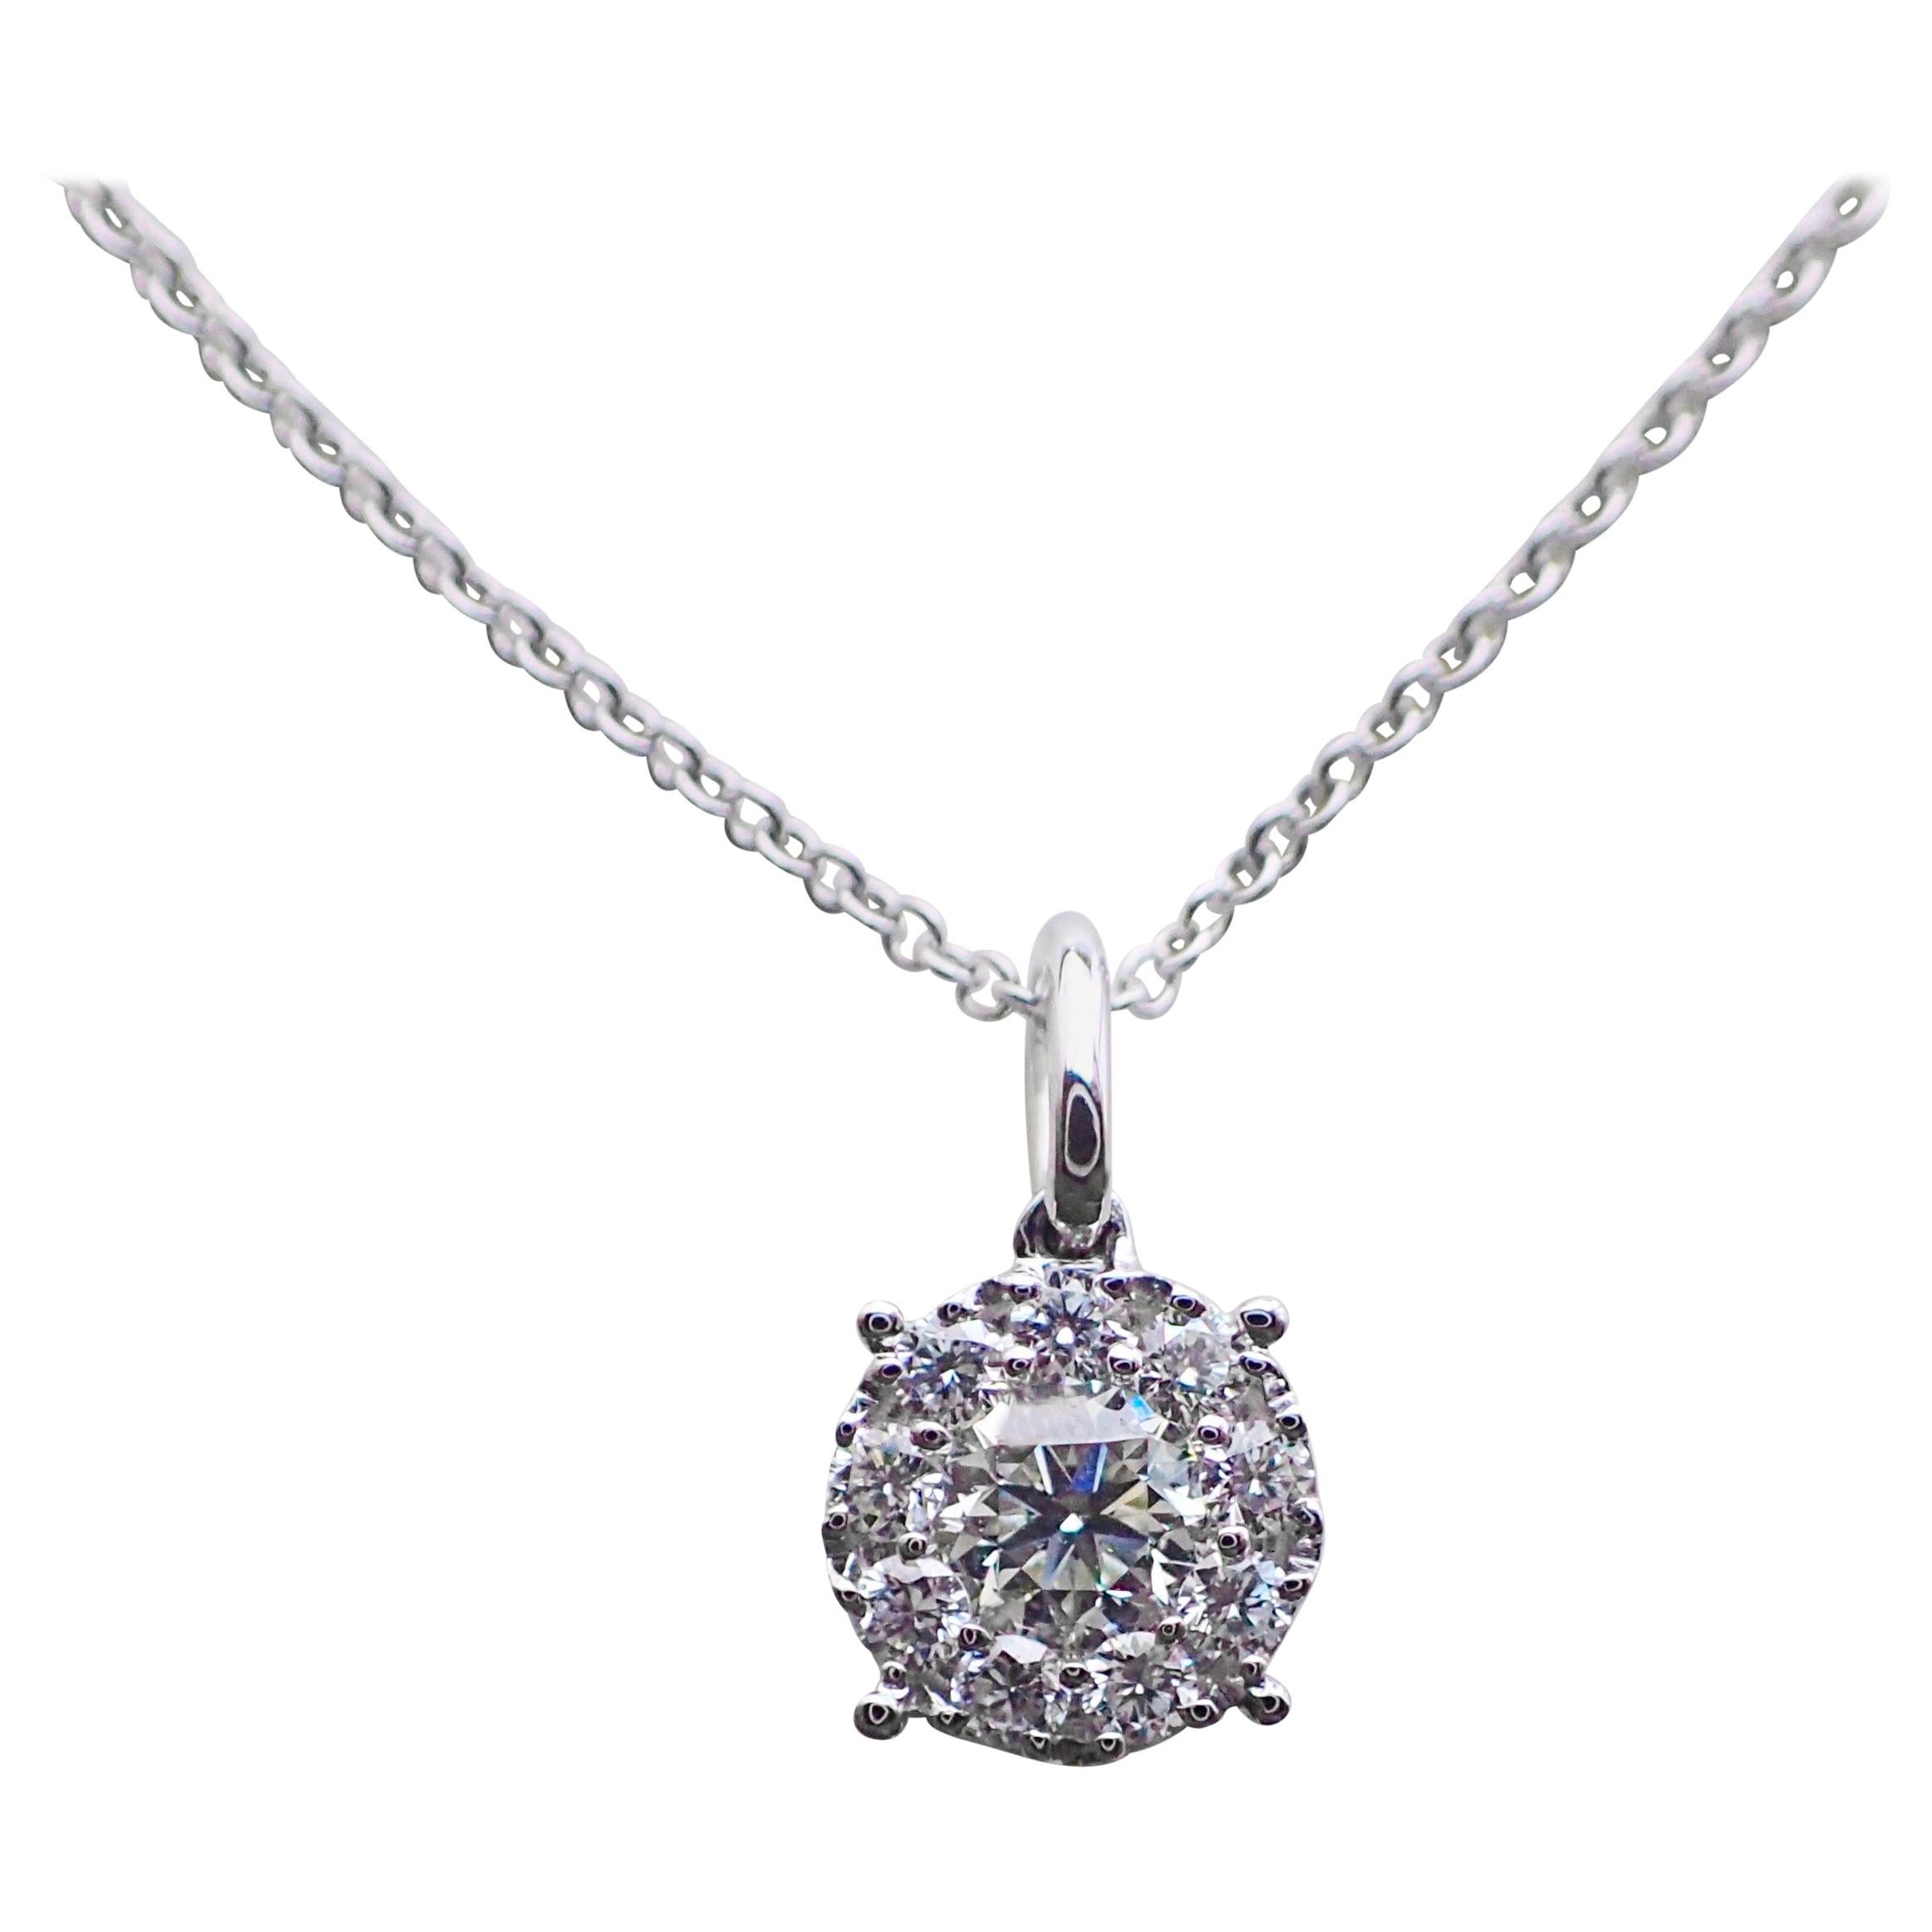 18 Karat White Gold Pendant with 0.46 Carat of Diamond Hangs from a Chain For Sale